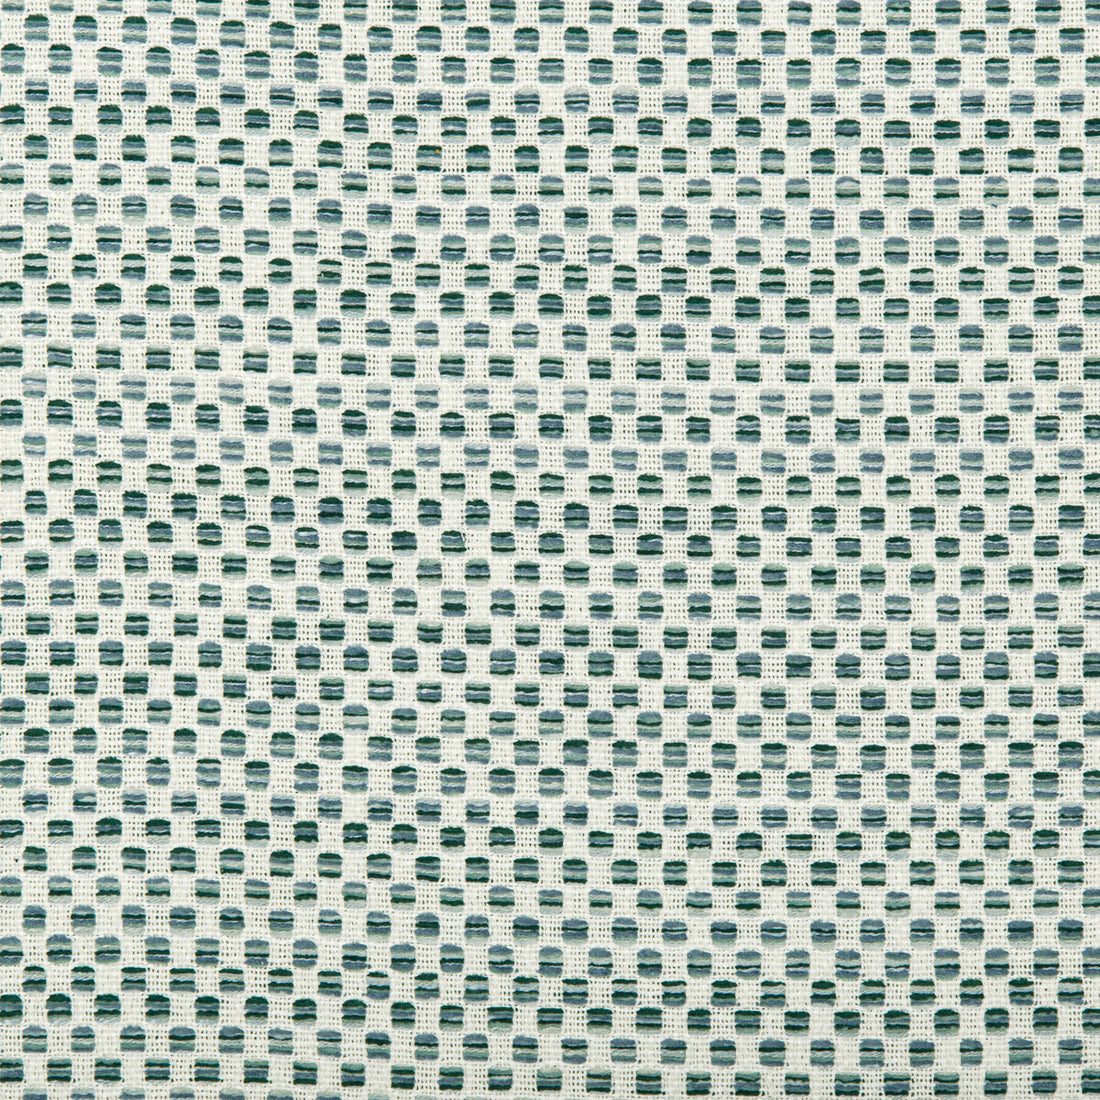 Kravet Design fabric in 36090-135 color - pattern 36090.135.0 - by Kravet Design in the Inside Out Performance Fabrics collection